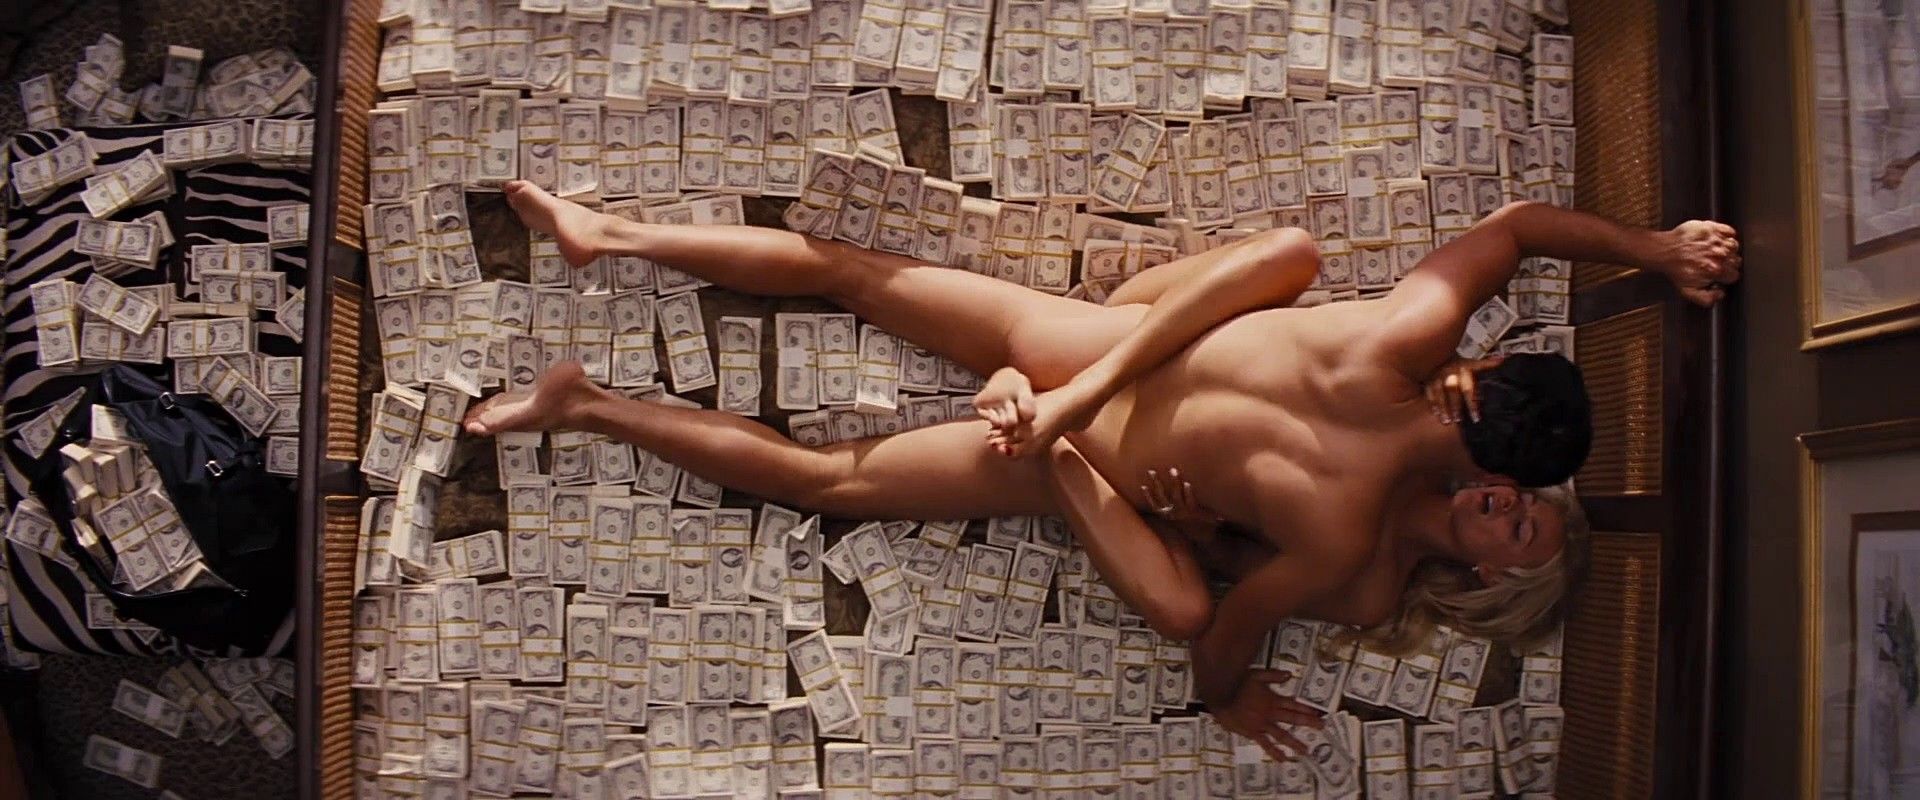 Wolf of wall street margot robbie naked